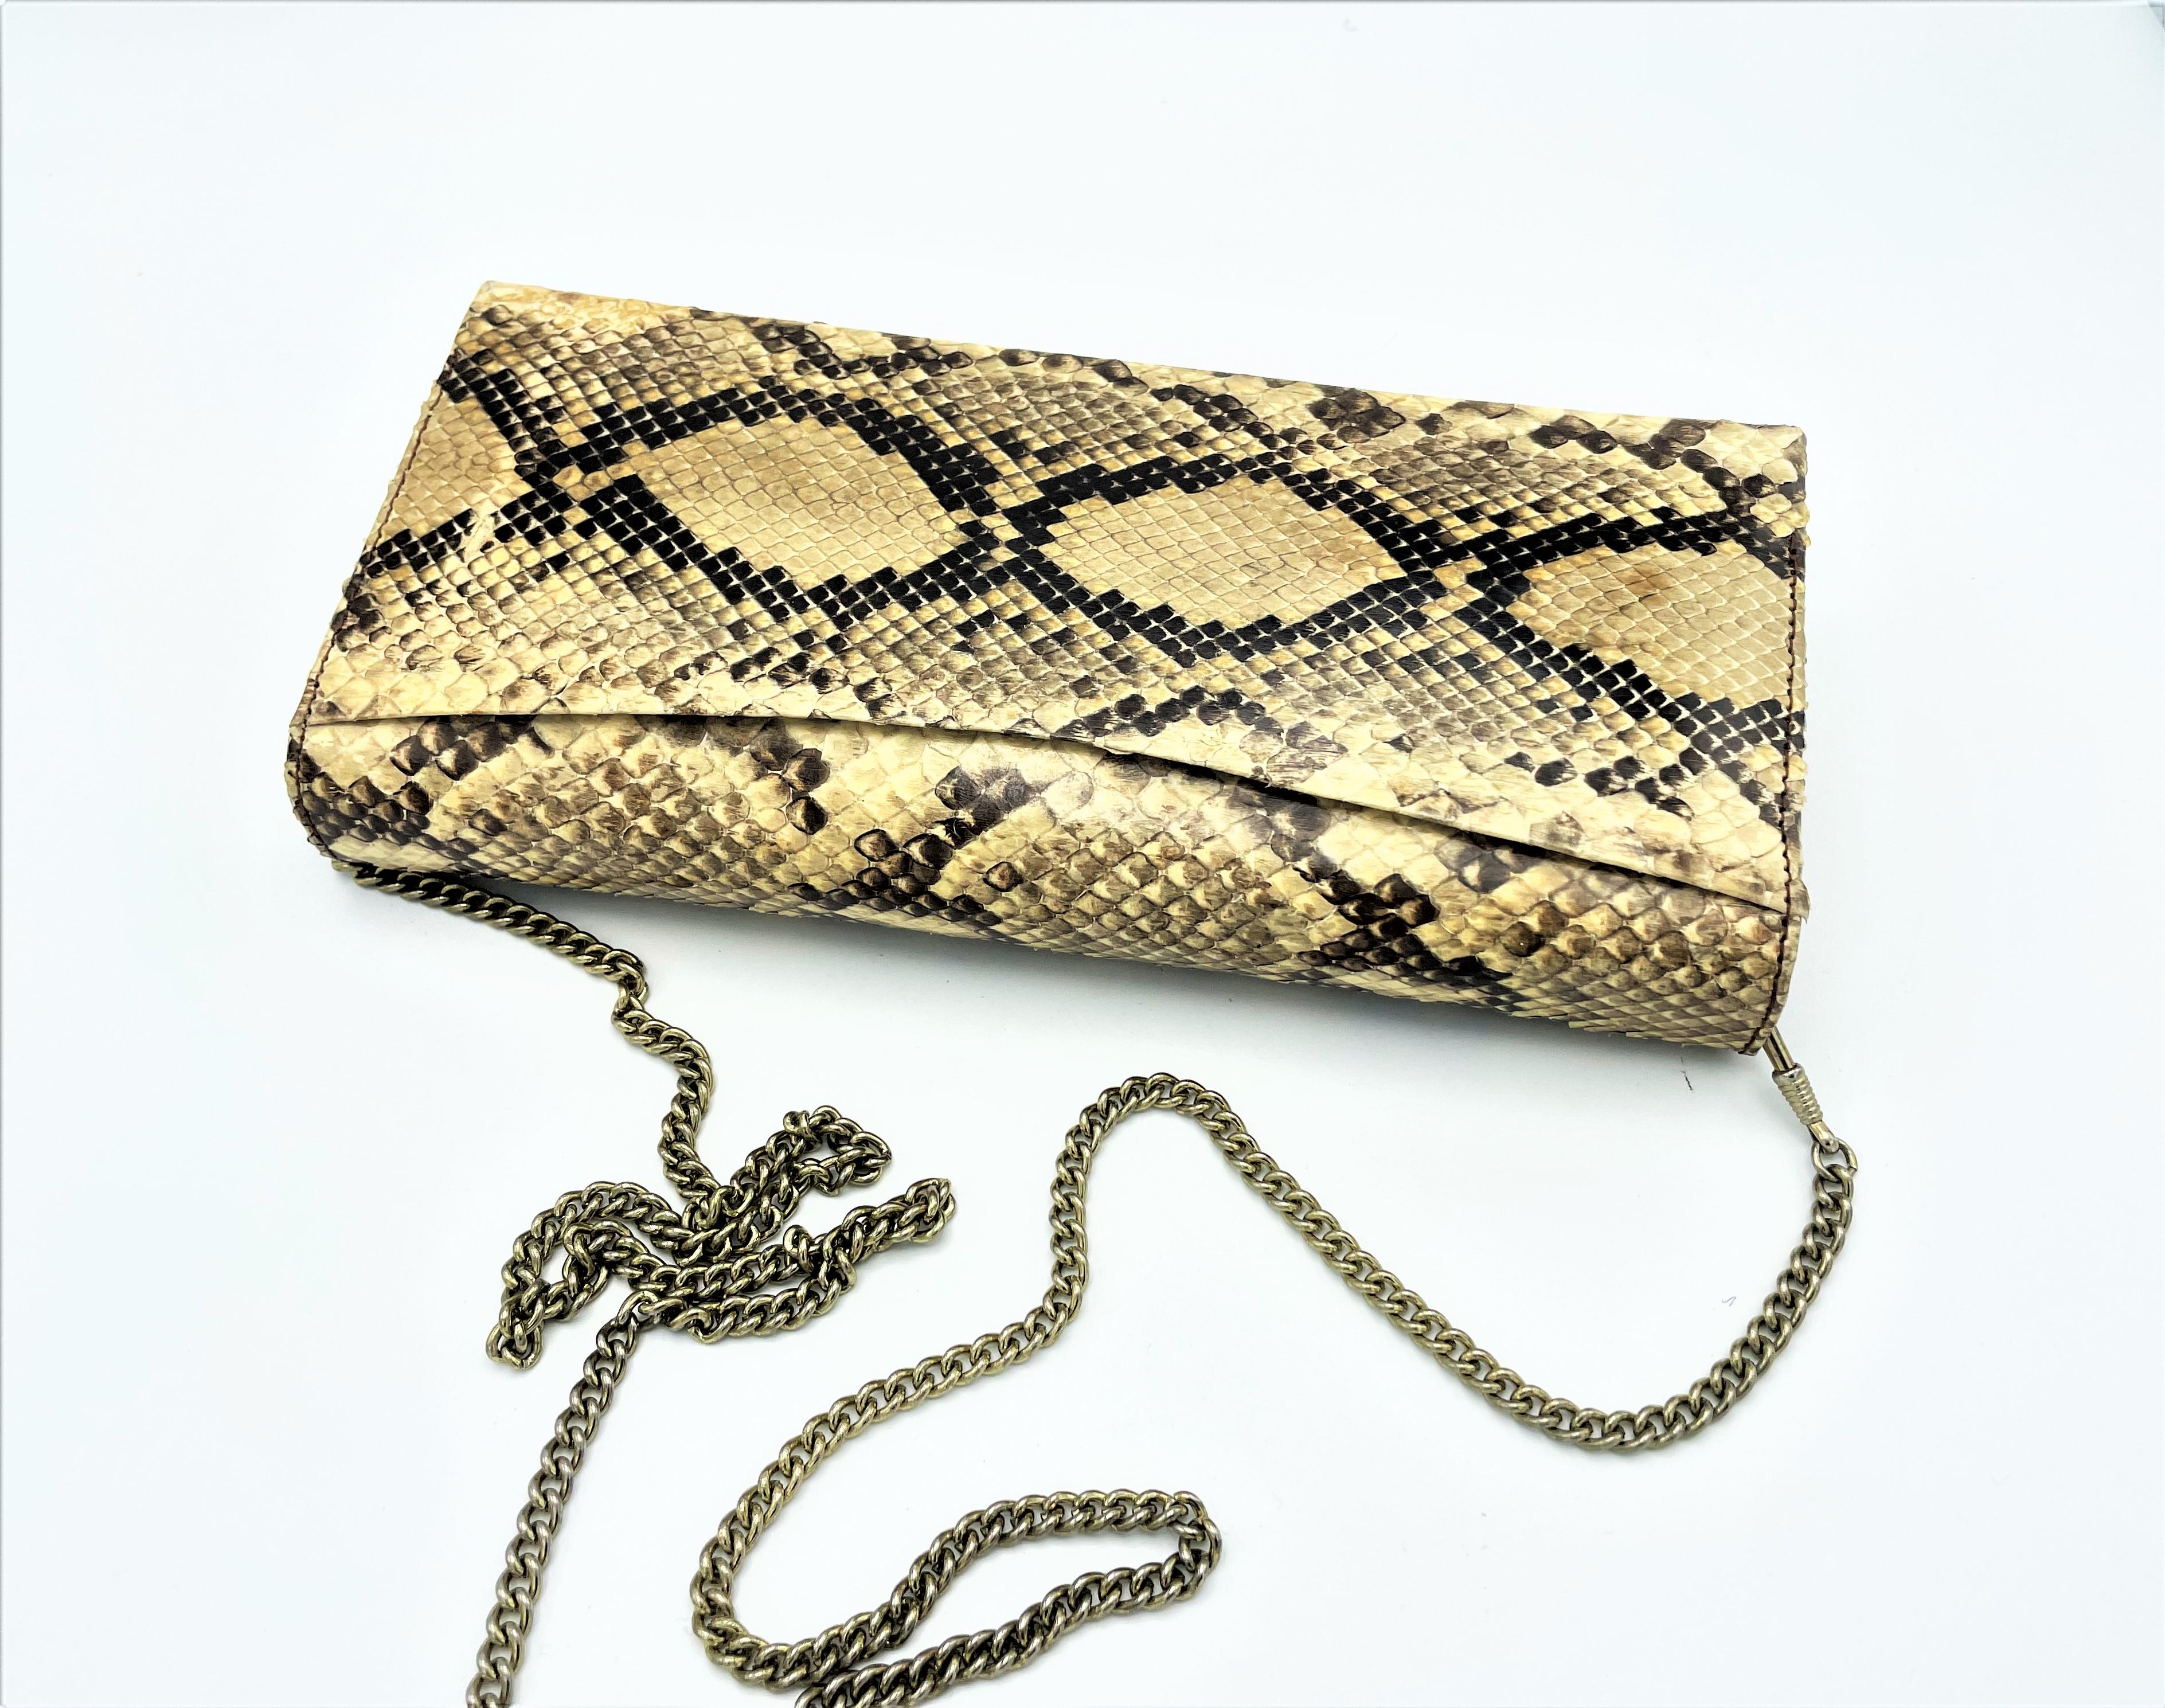 Vintage snake clutch bag with detachable lang chain, UK 1920s For Sale 4